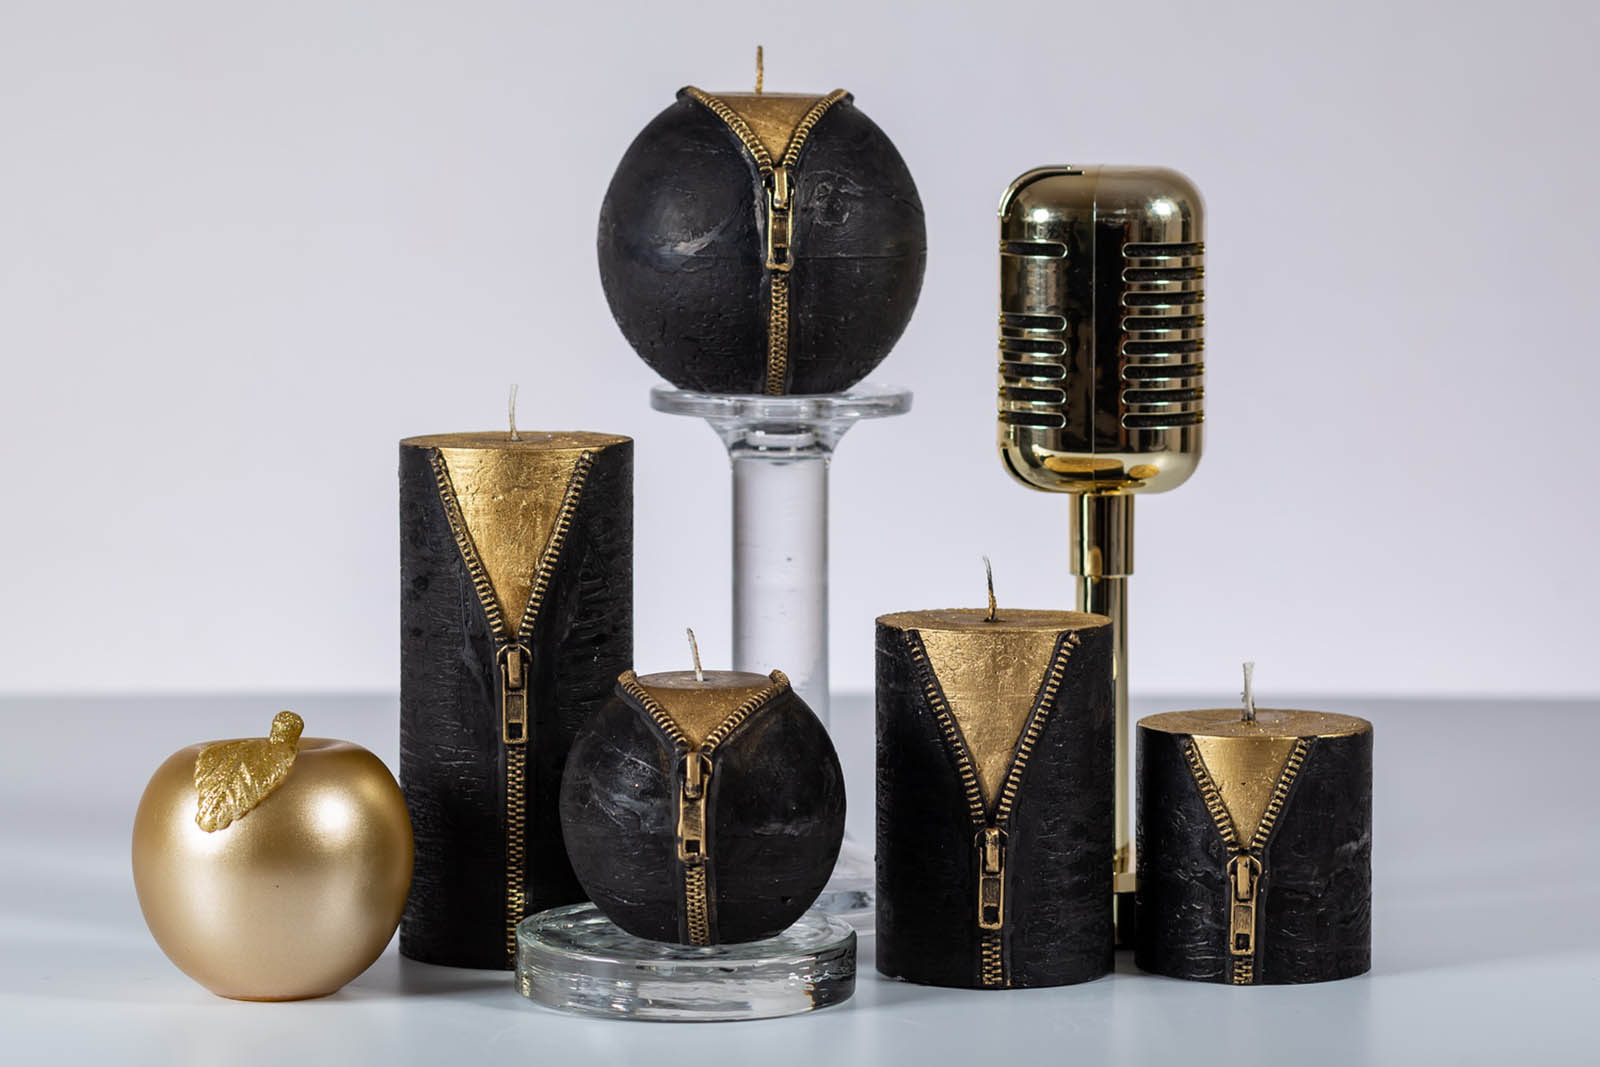 Five Black and gold candles with zipper sitting beside golden apple and microphone